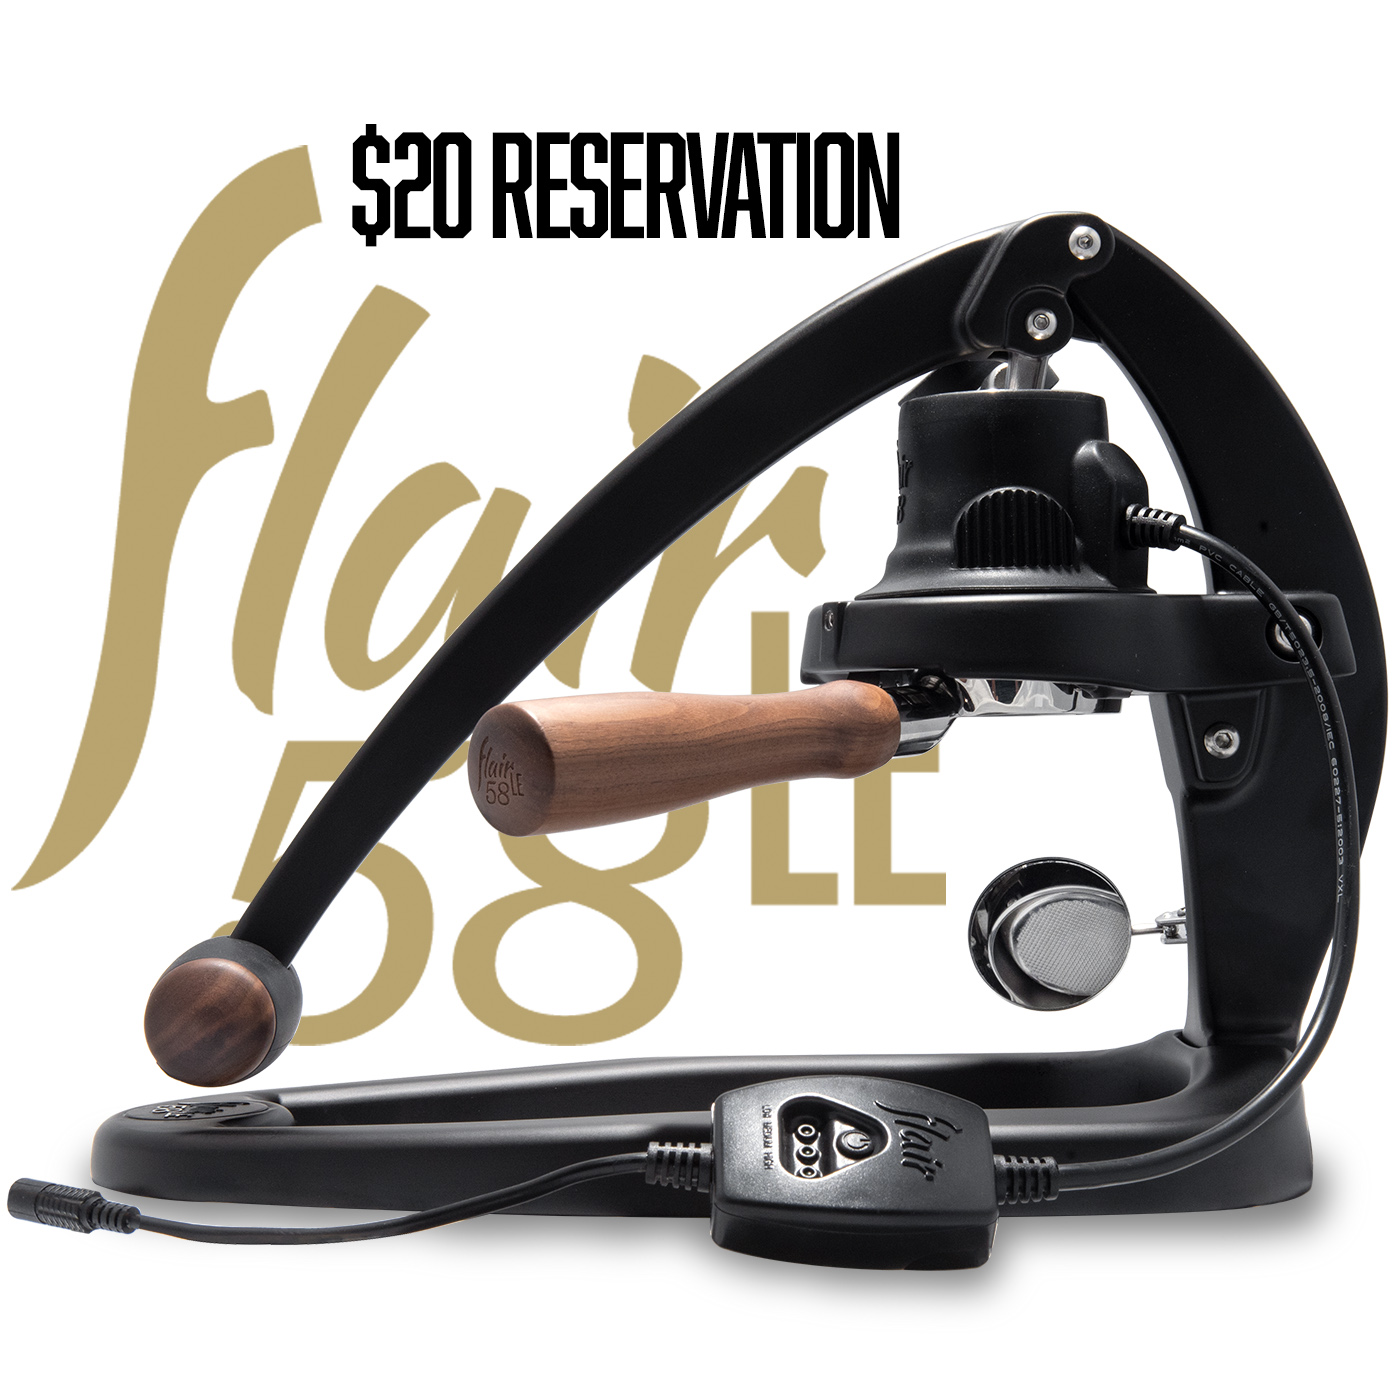 Flair 58 LE $20 Reservation